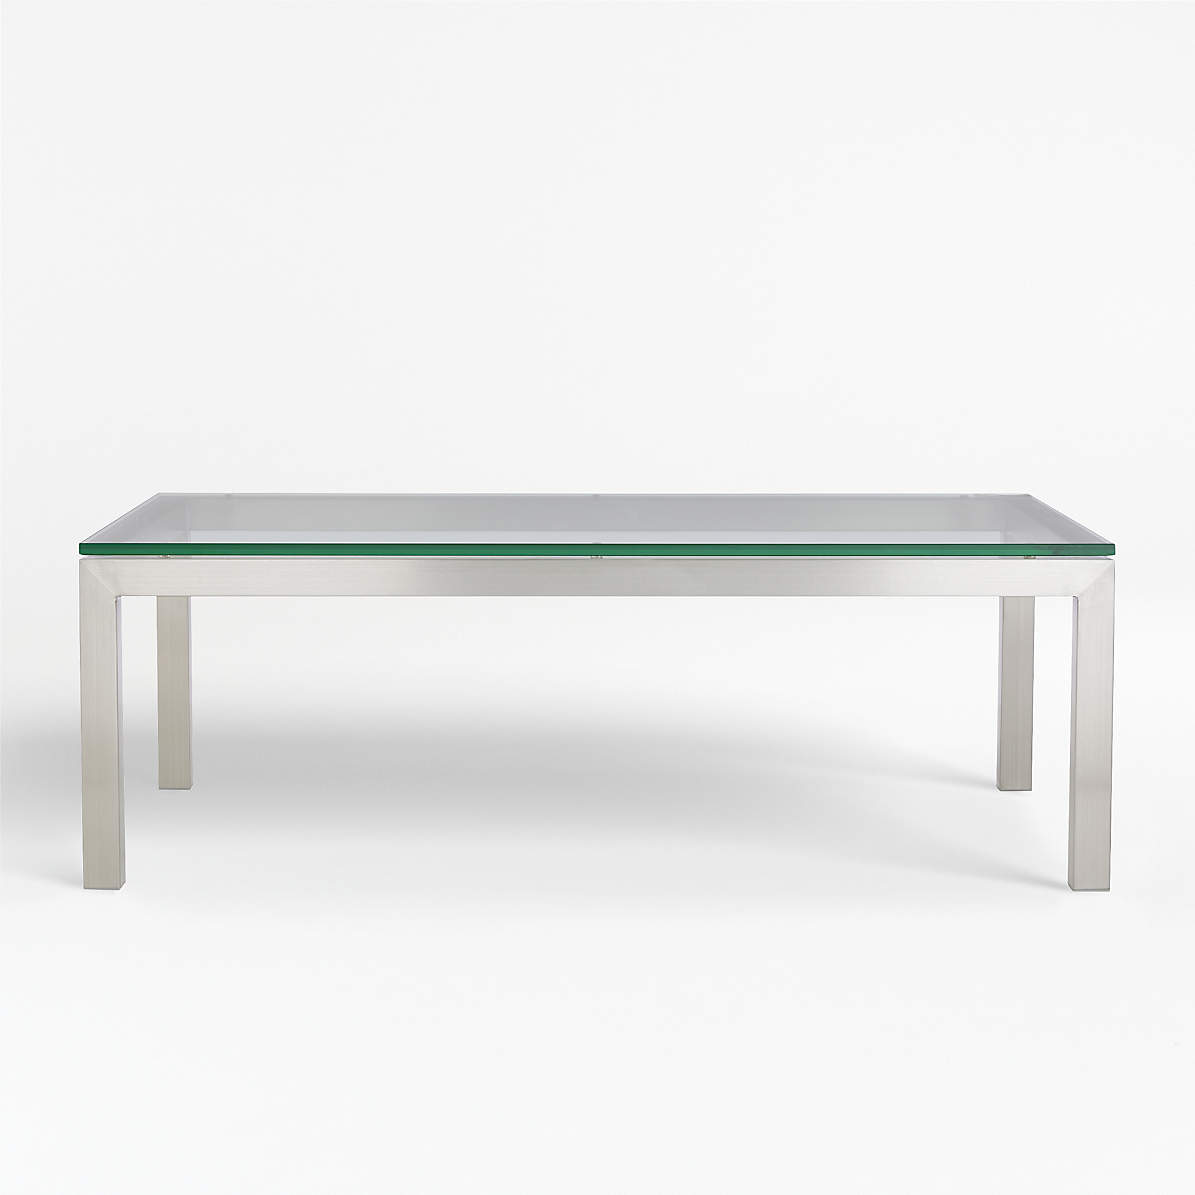 Featured image of post Rectangle Coffee Table With Glass Top : Alibaba.com offers 1,756 rectangle glass top coffee table products.